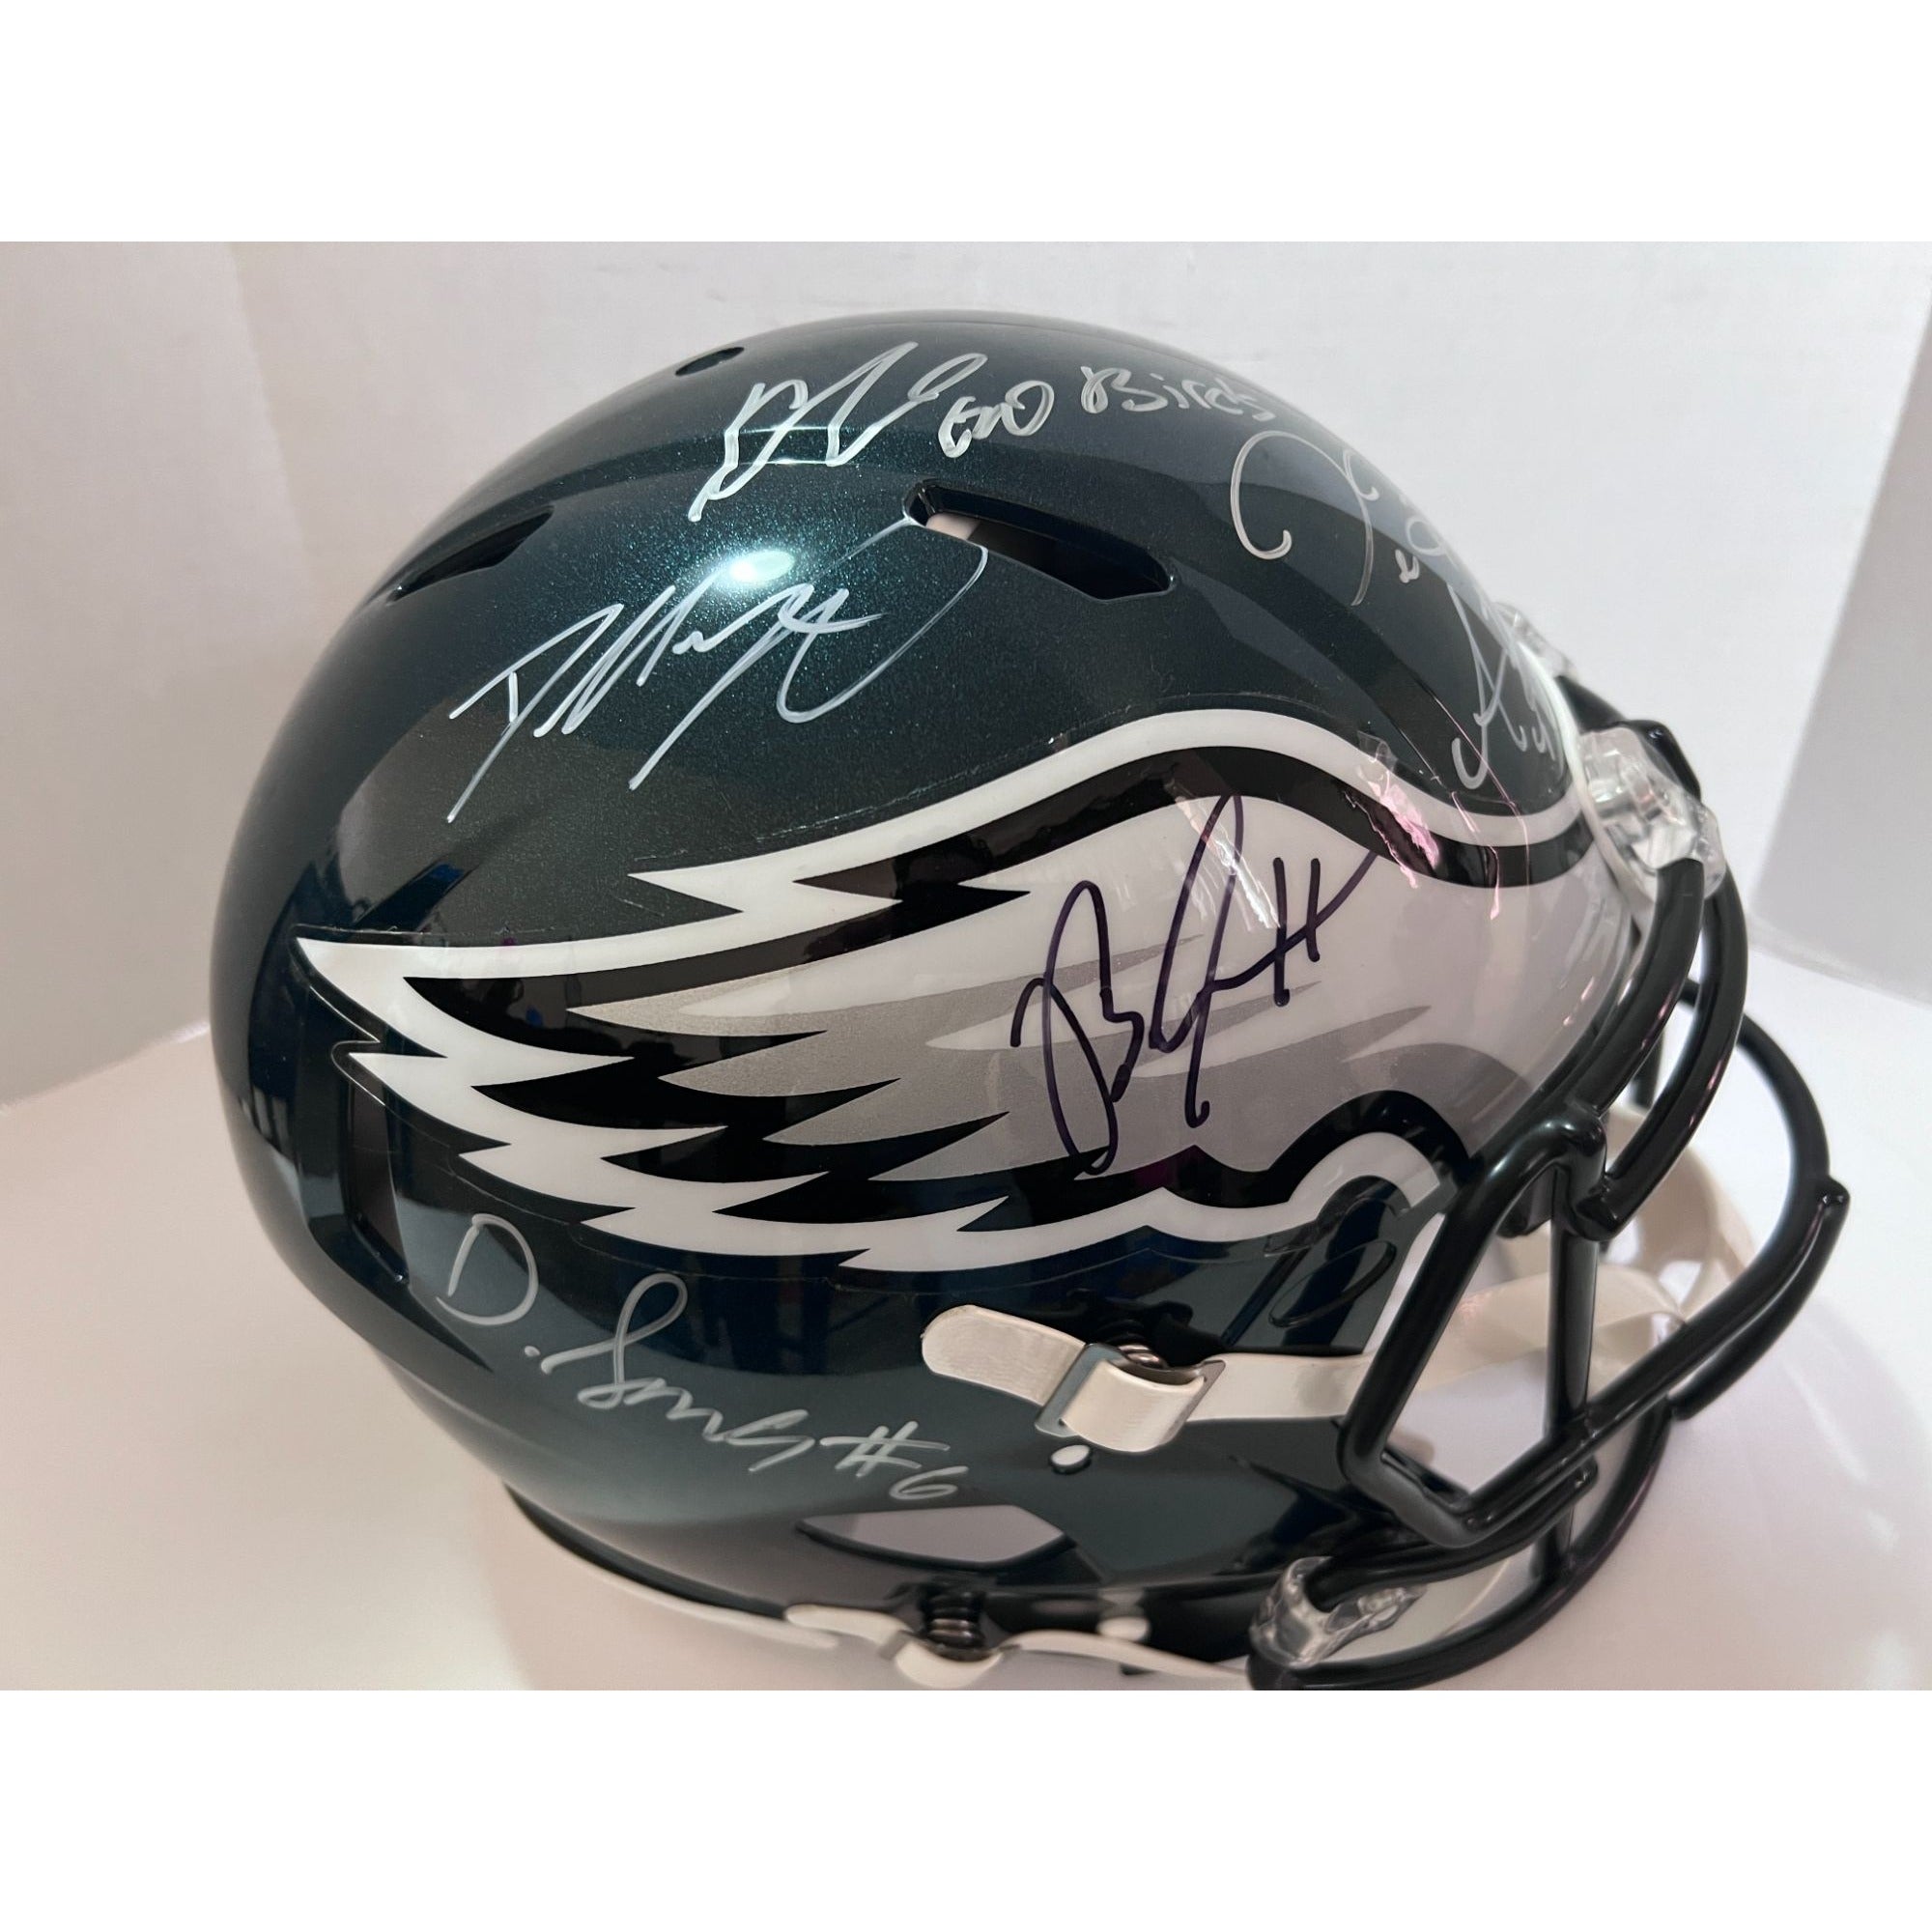 Philadelphia Eagles Riddell speed authentic helmet Jalen Hurts signed with free acrylic display case